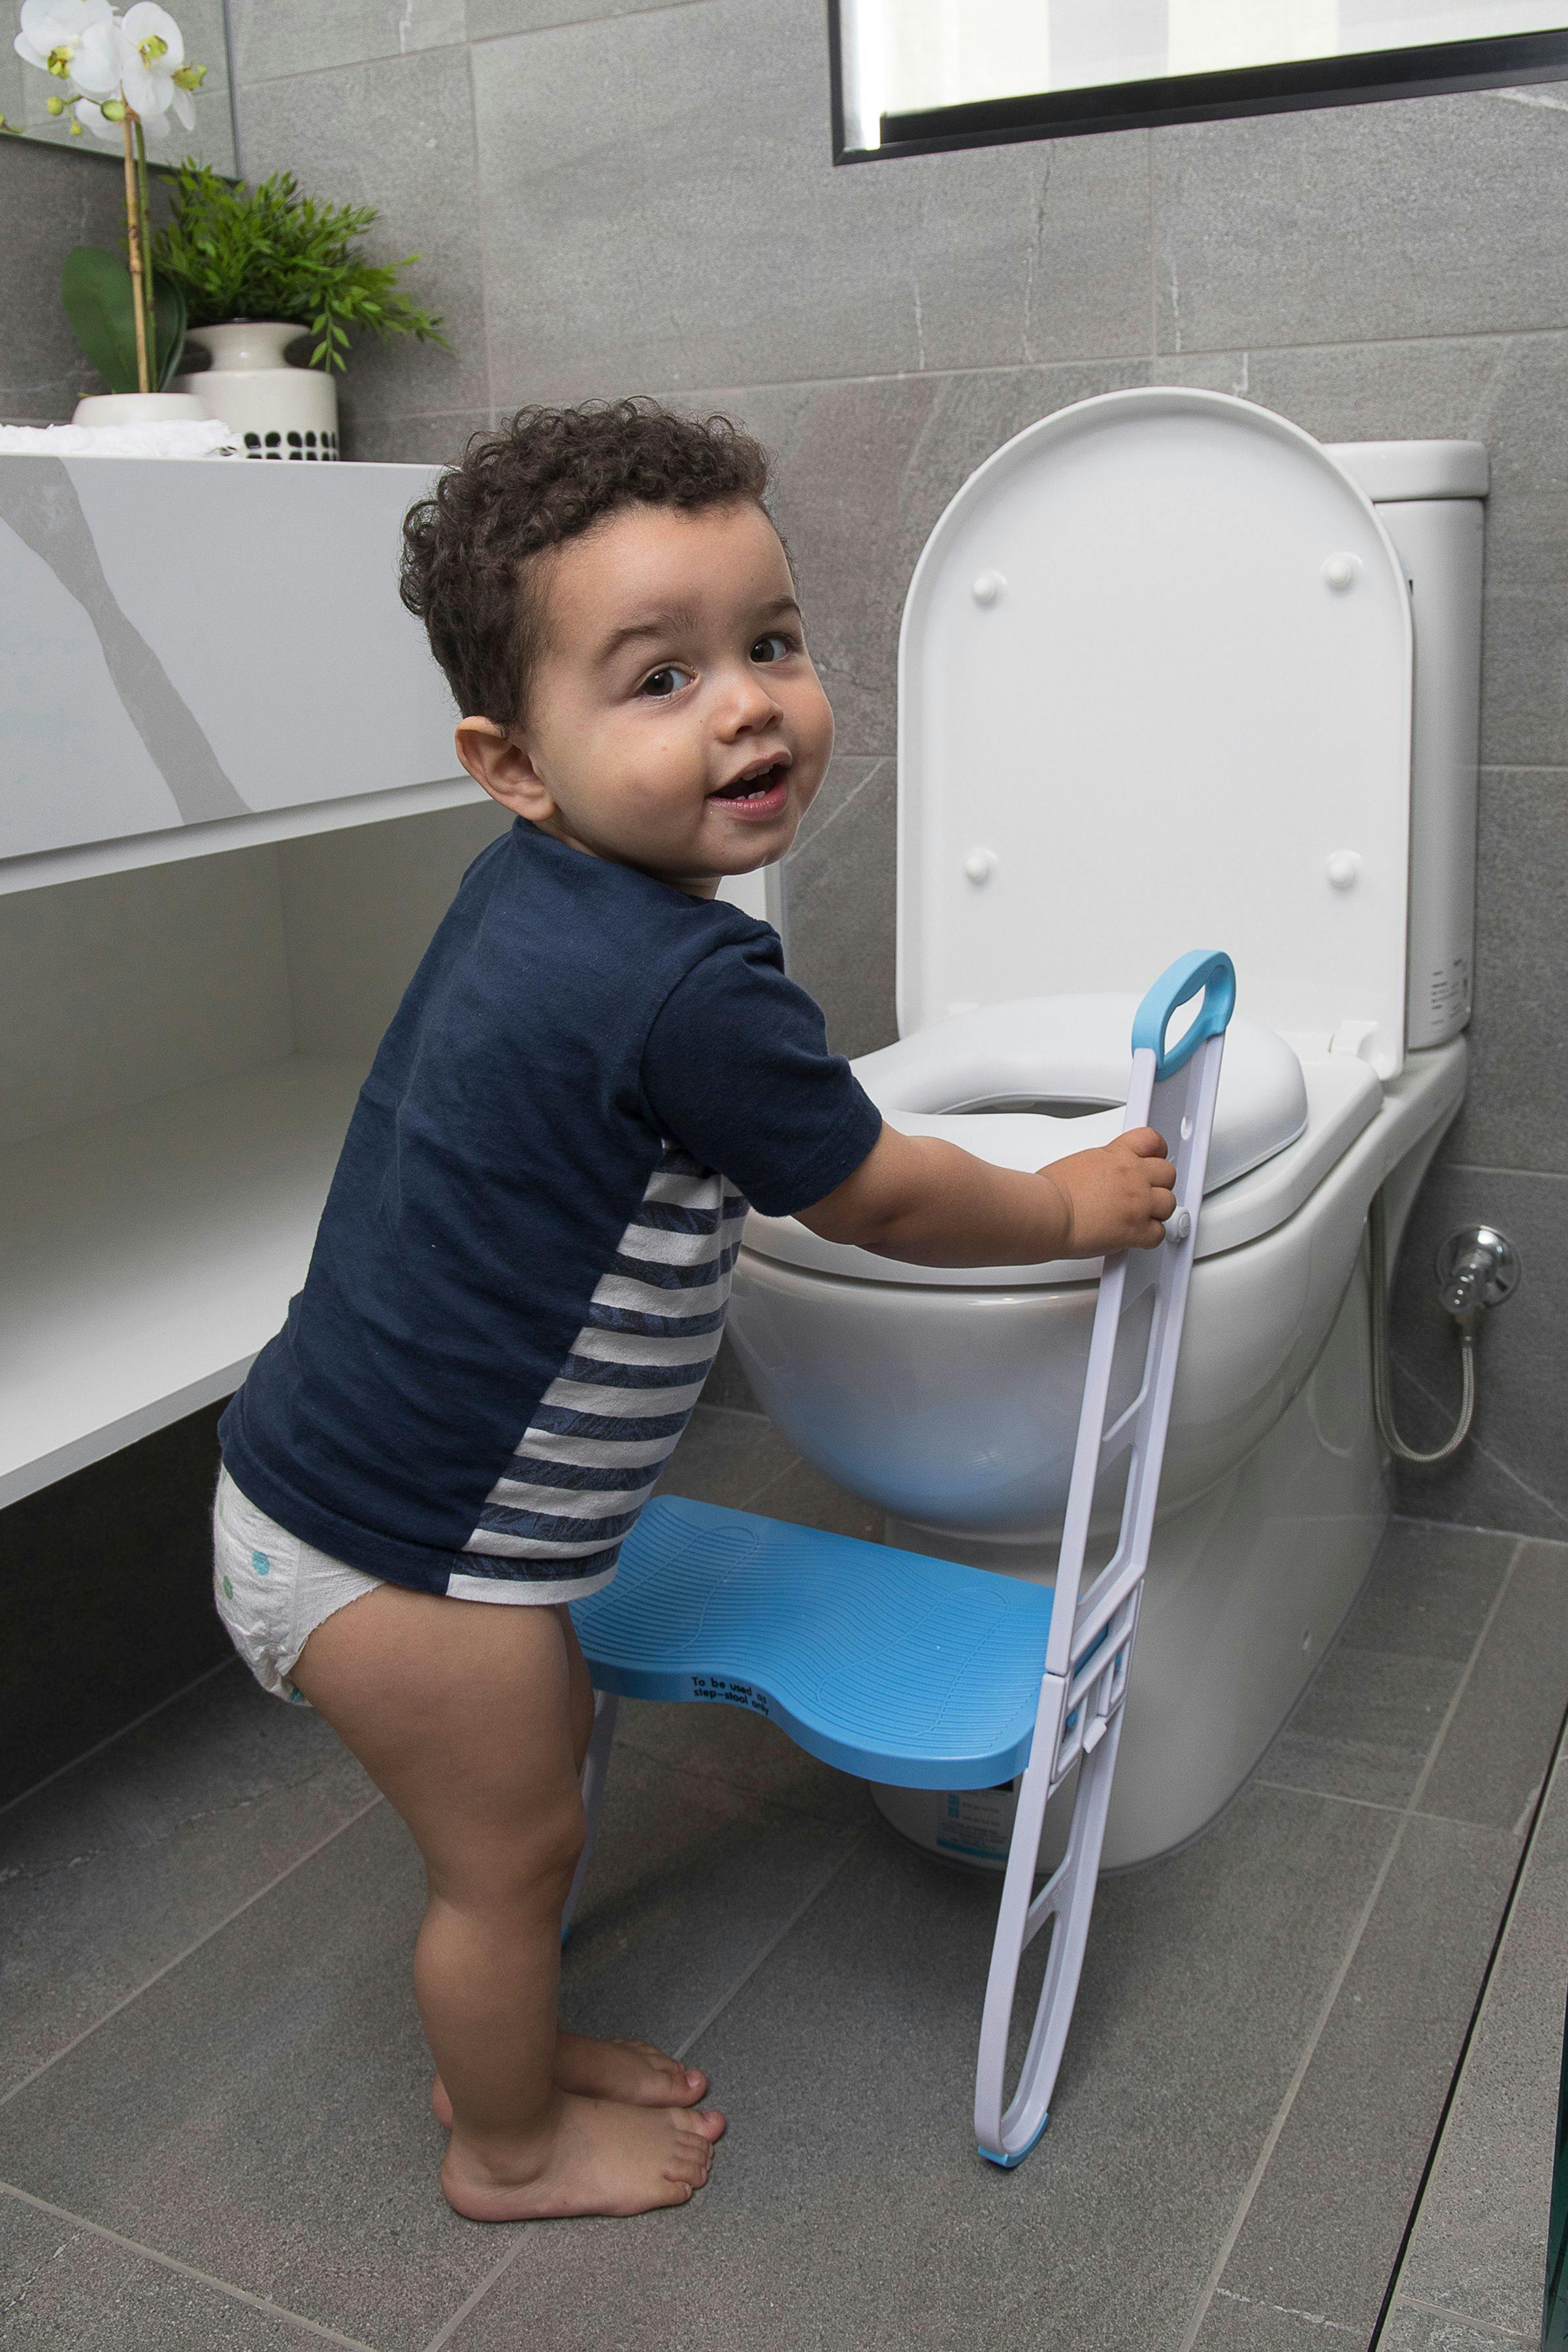 Image for Image for Toilet training